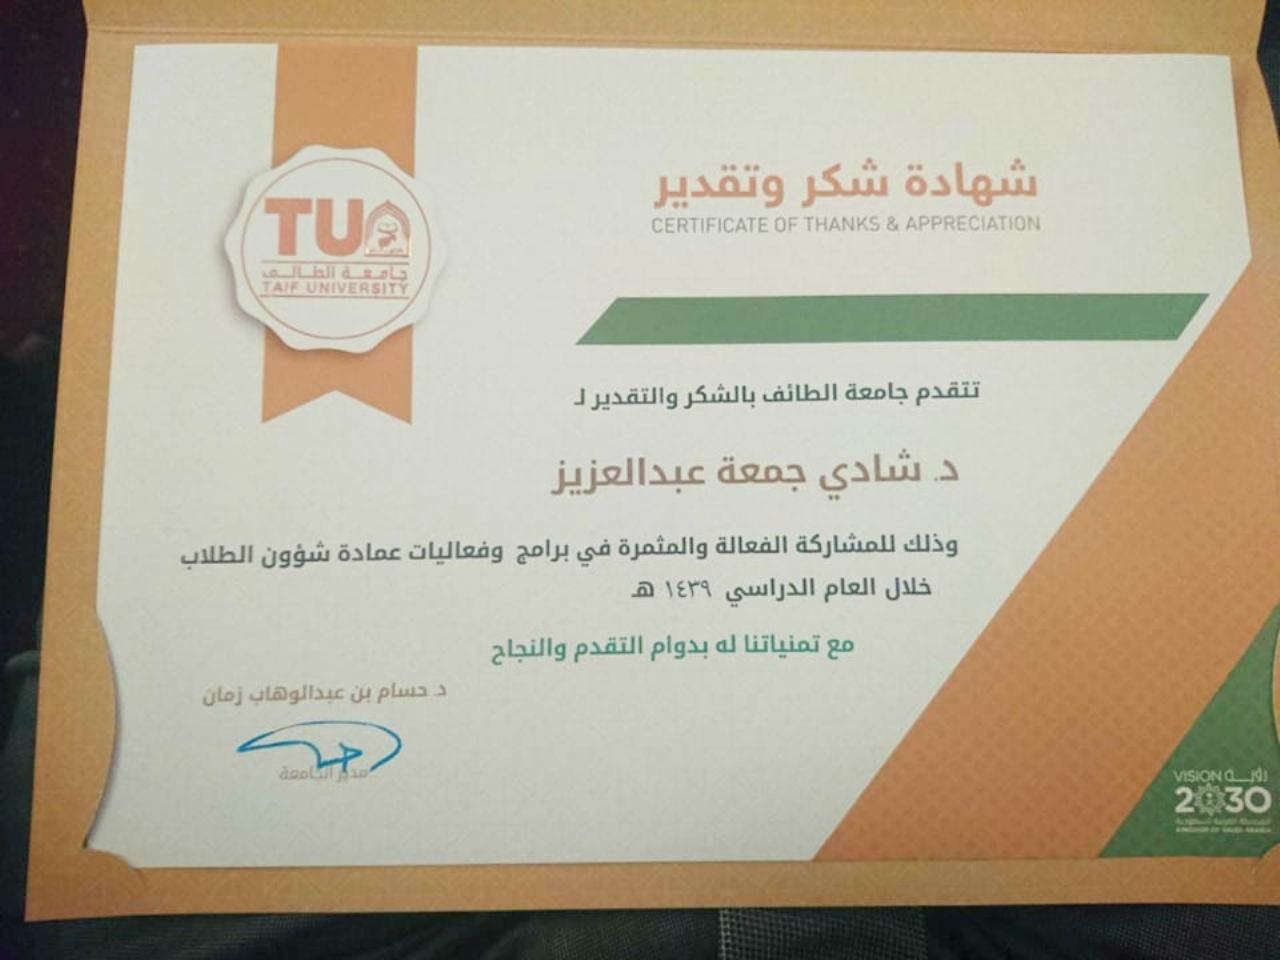  The Community College is honored in the students' activities closing ceremony at Taif University